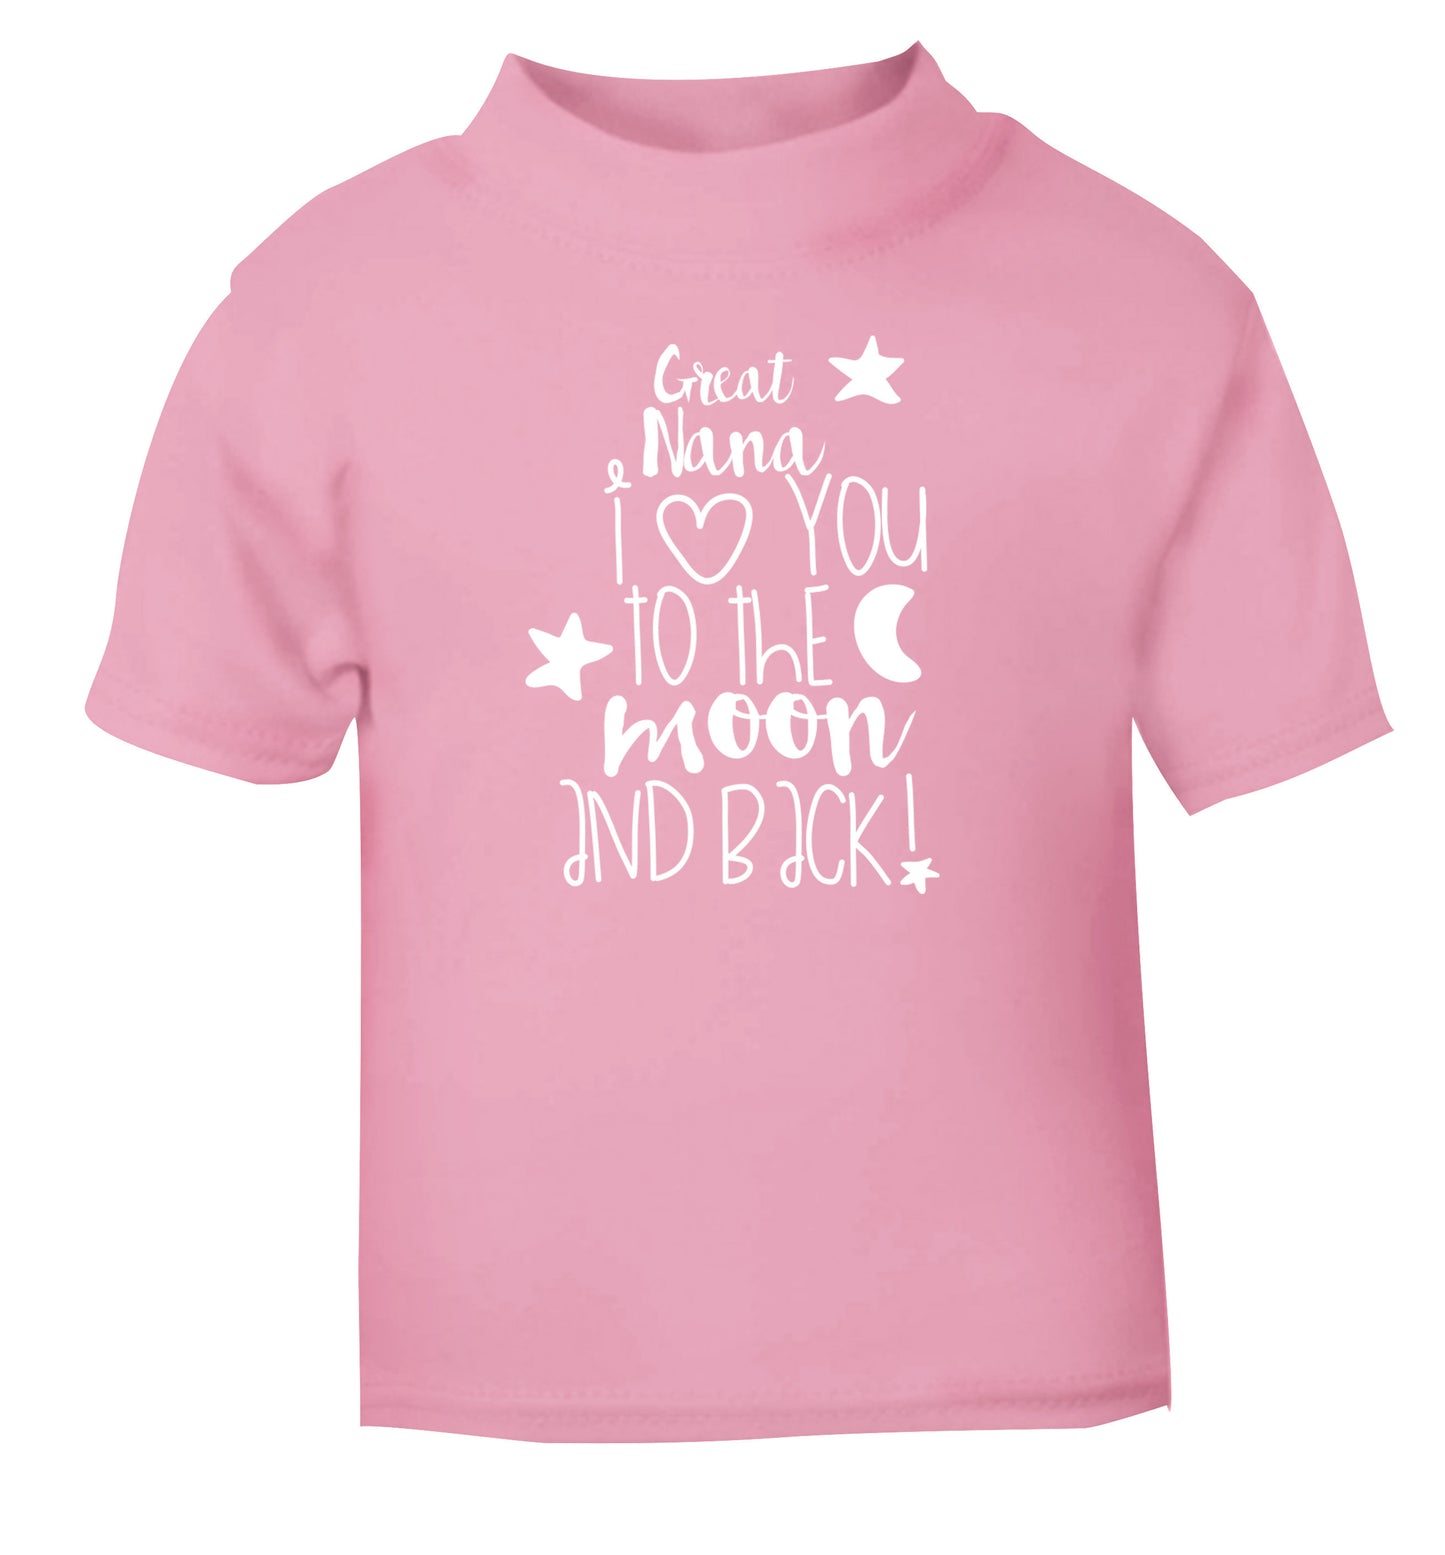 Great Nana I love you to the moon and back light pink Baby Toddler Tshirt 2 Years